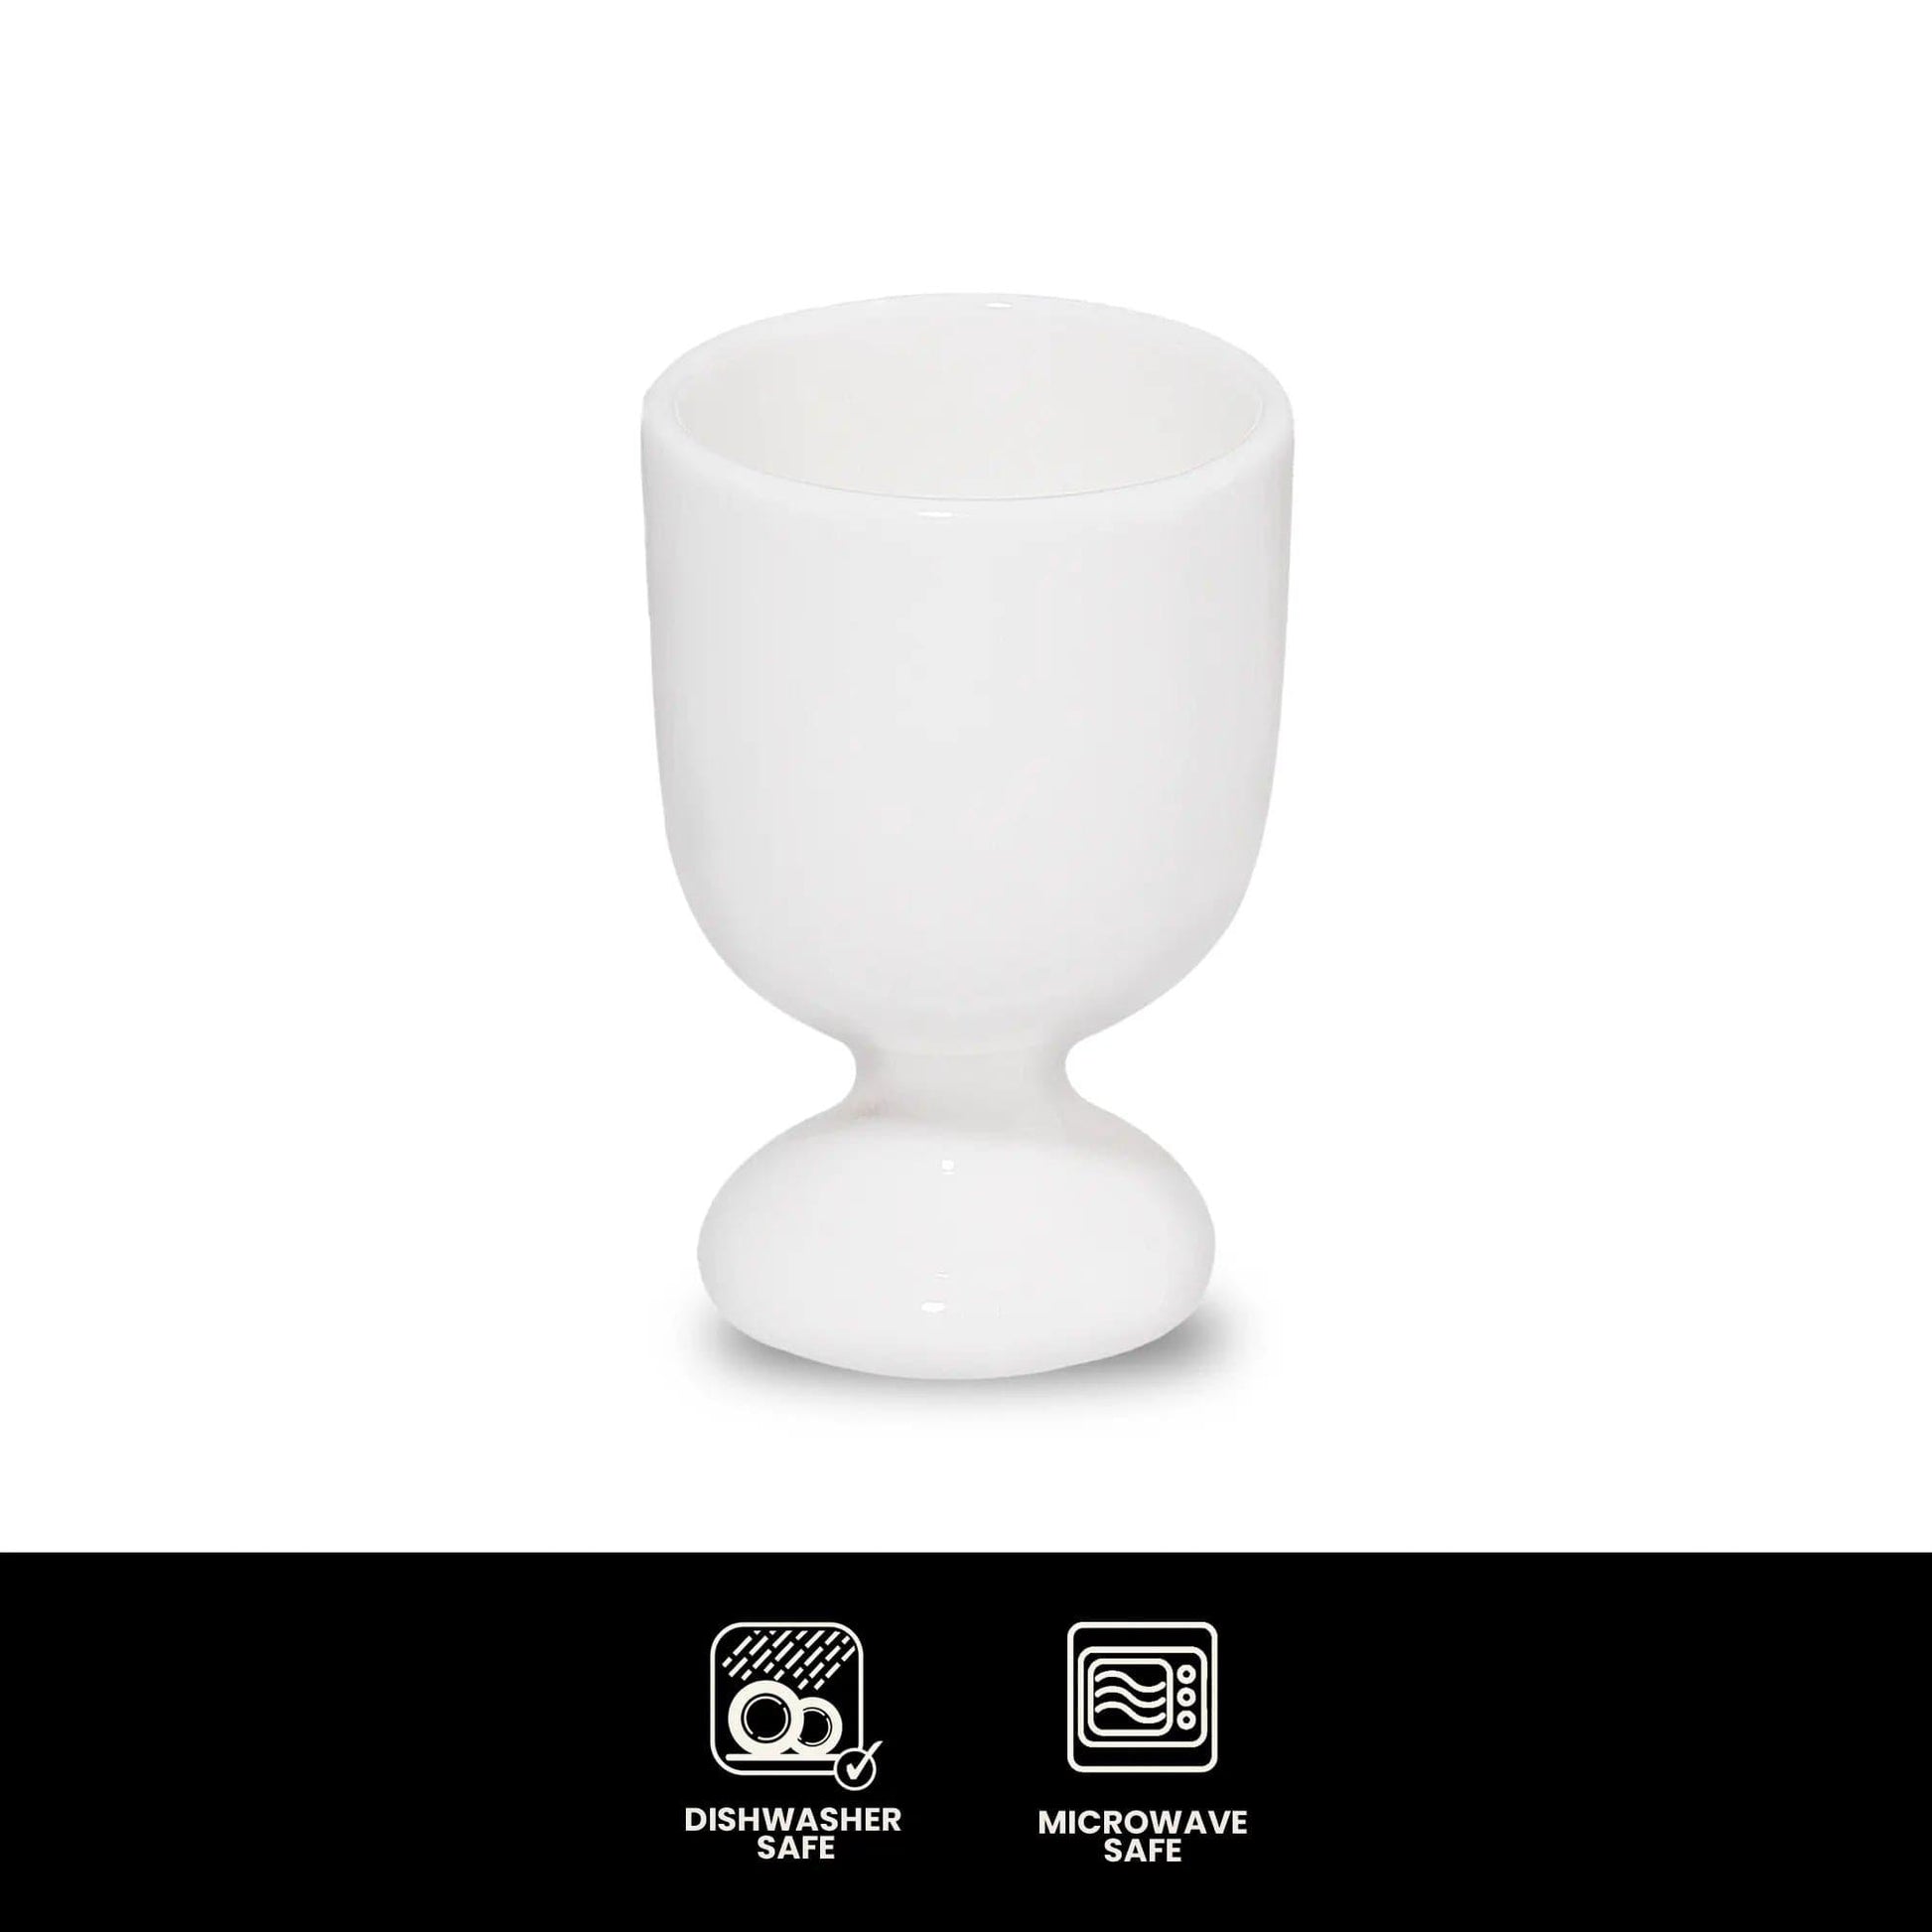 Furtino England Finesse White Round Porcelain Egg Cup 6/Case